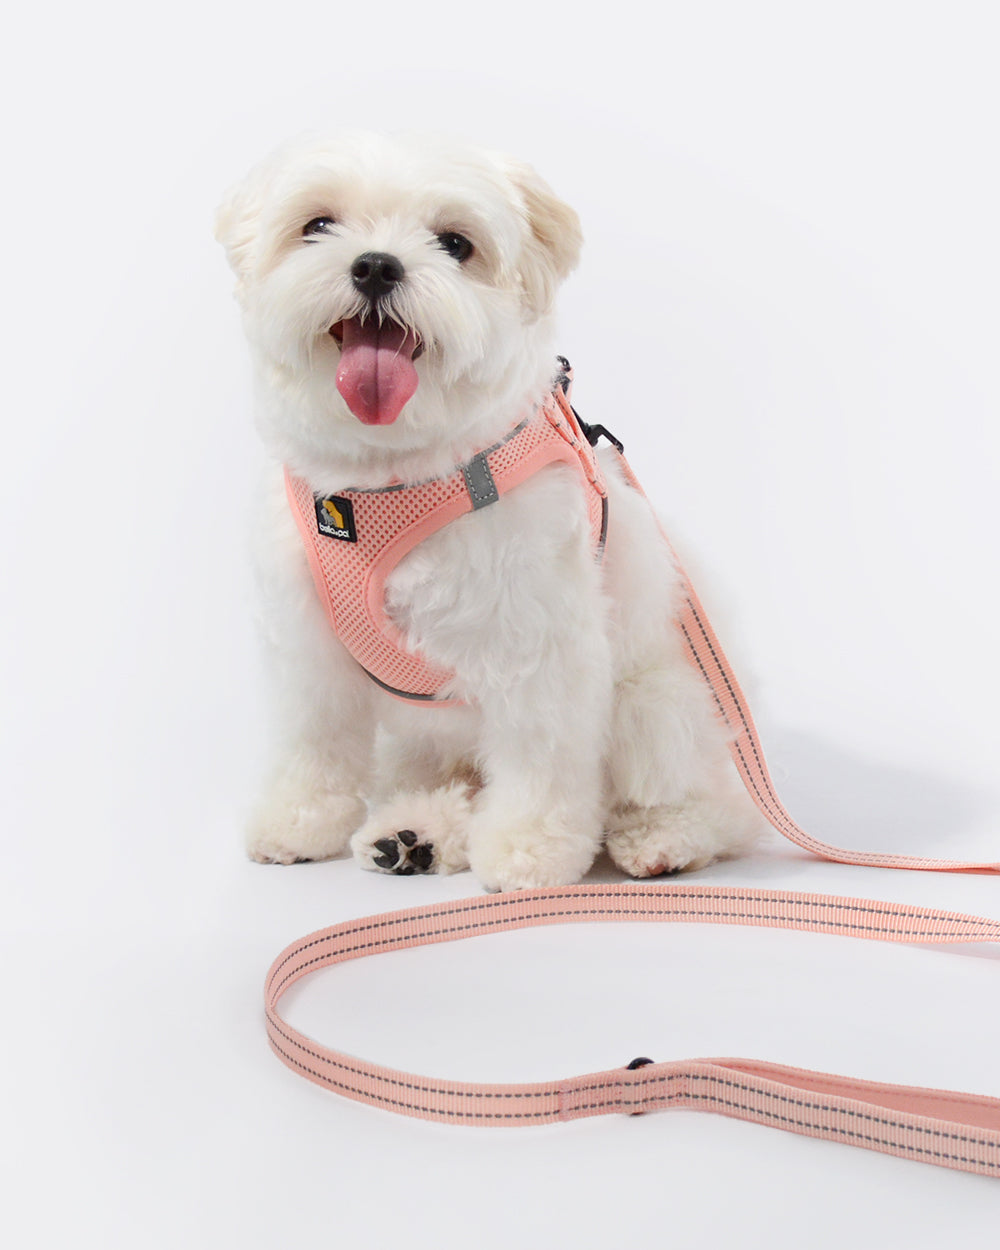 OxyMesh Step-in Harness Walking Set- Coral Pink